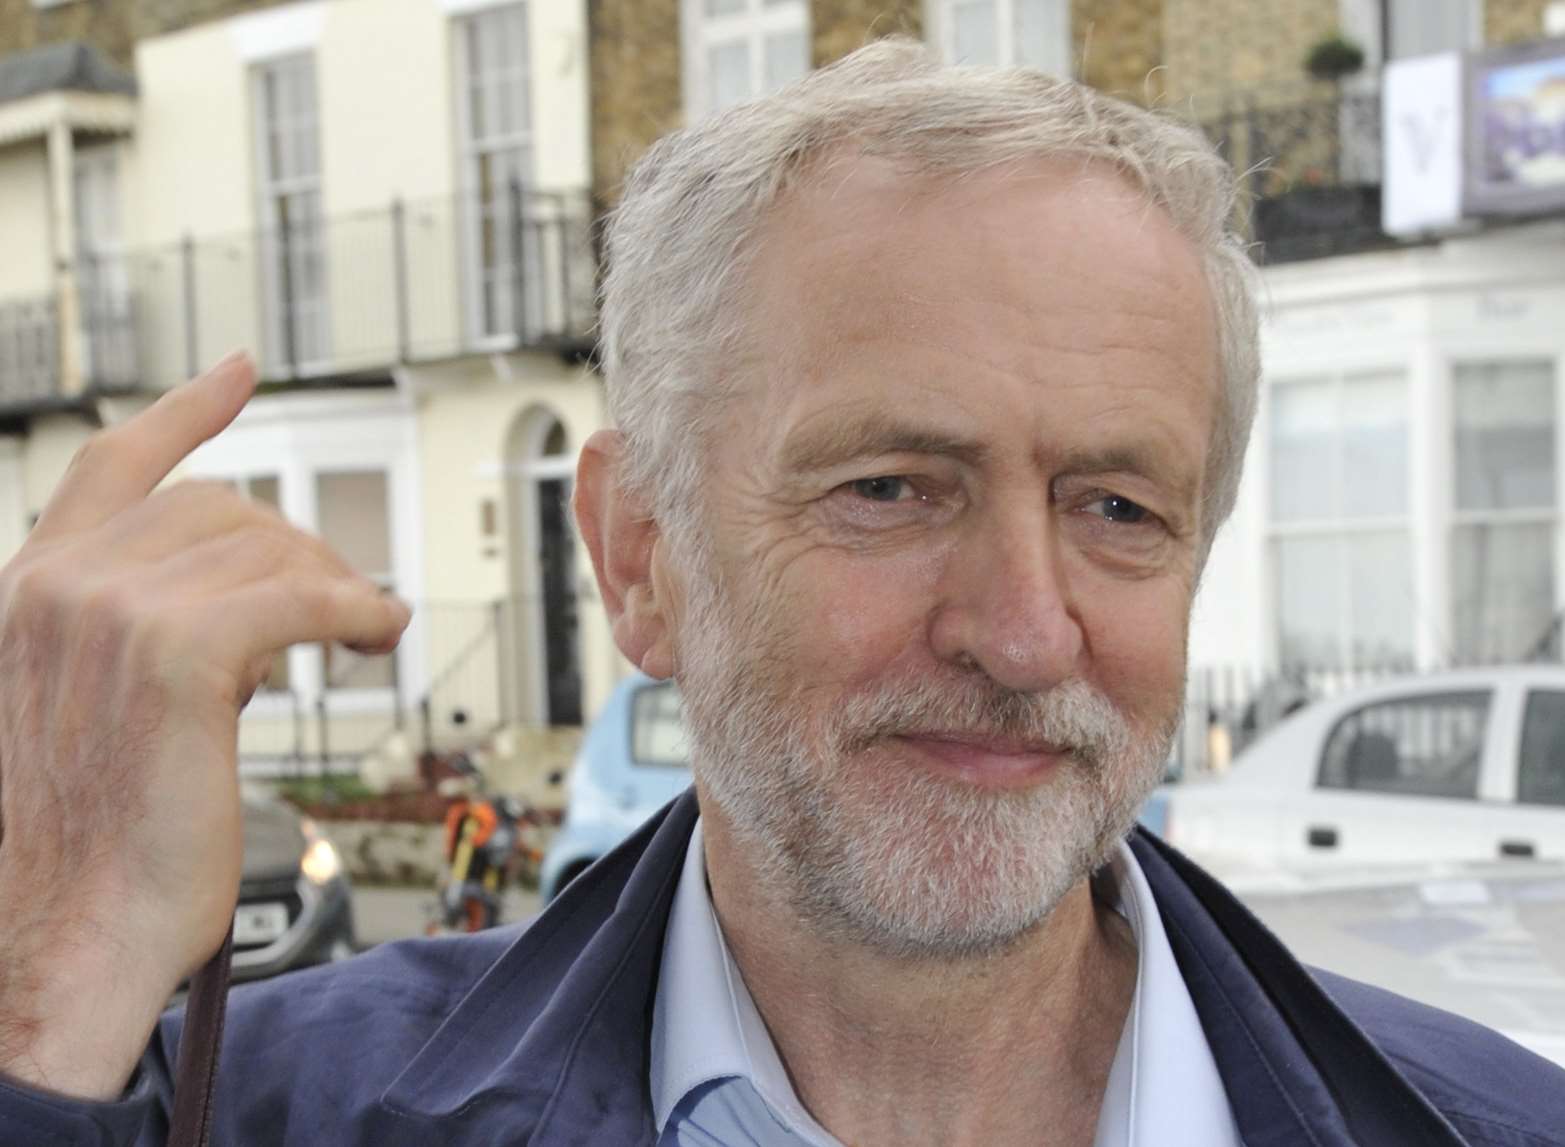 Jeremy Corbyn, the new Leader of the Labour Party